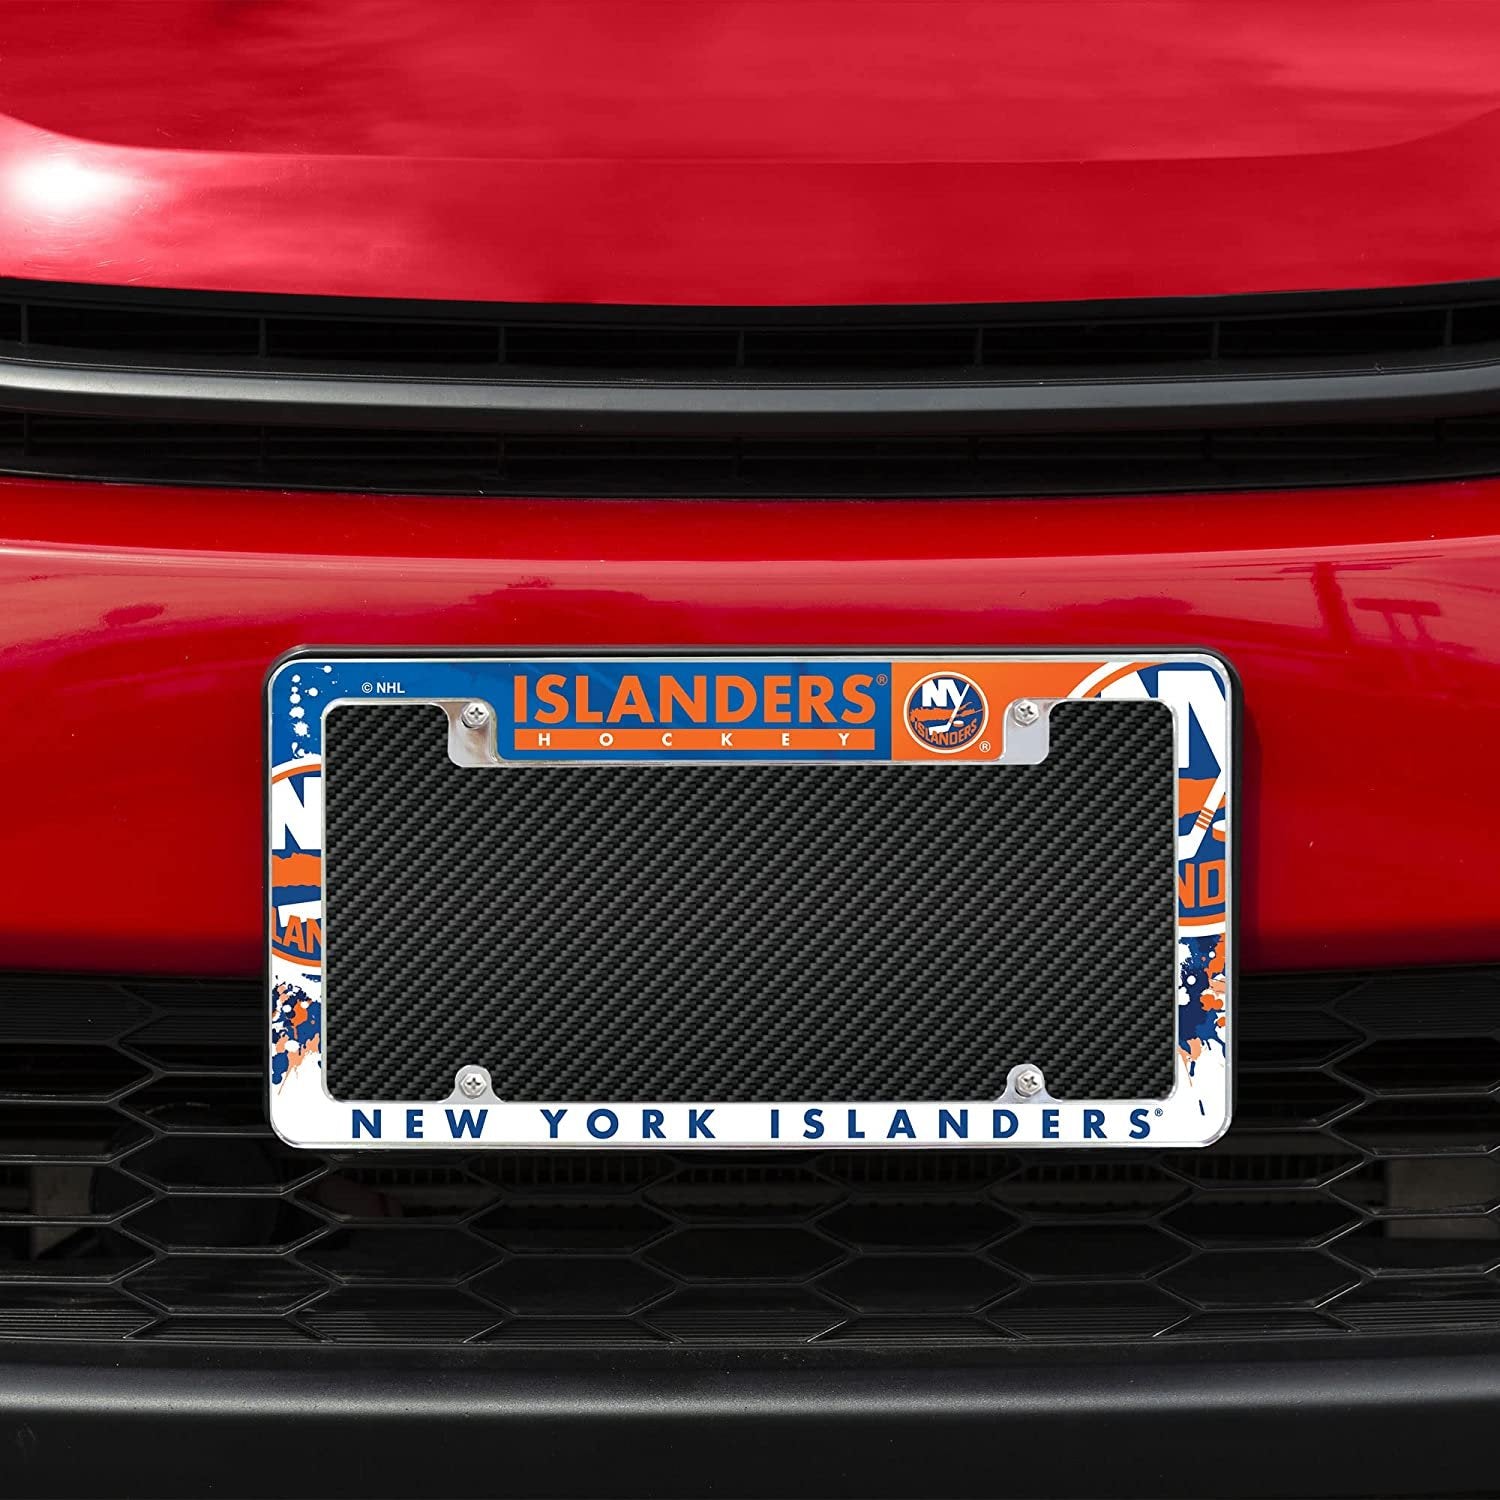 New York Islanders Metal License Plate Frame Chrome Tag Cover, All Over Design, 12x6 Inch